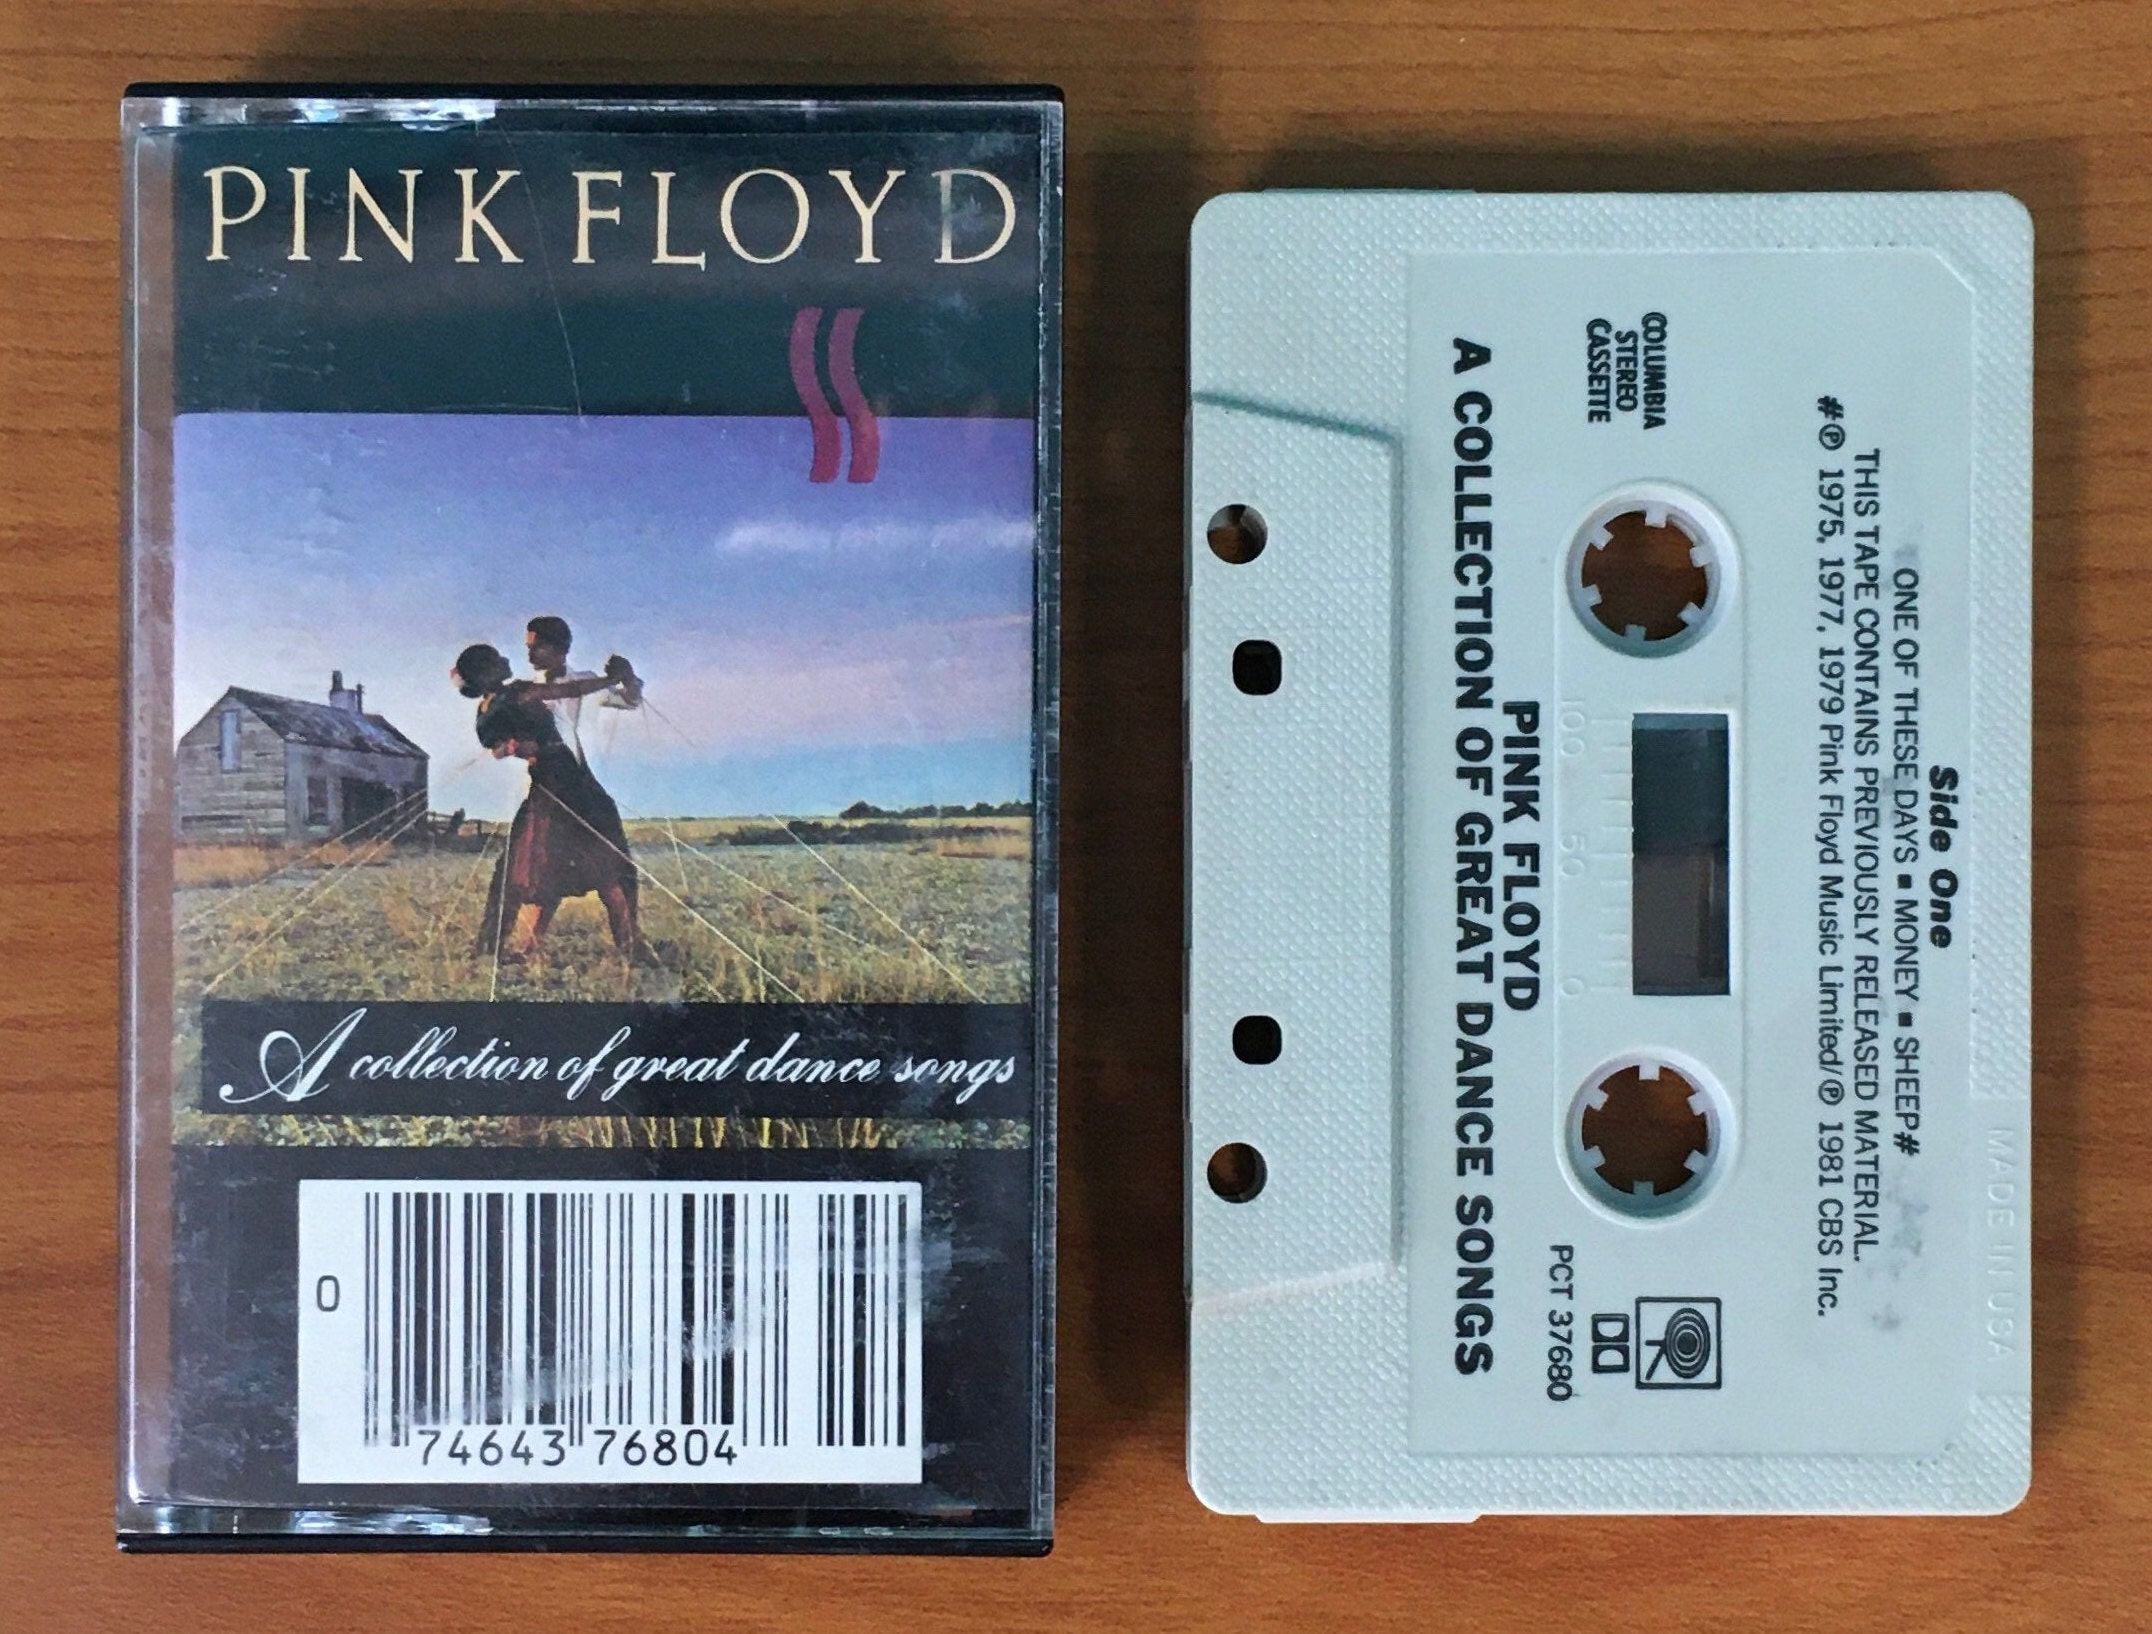 Vintage Cassette Tape Pink Floyd, A Collection of Great Dance Songs, 1981,  Tested, Very Good Condition -  Canada